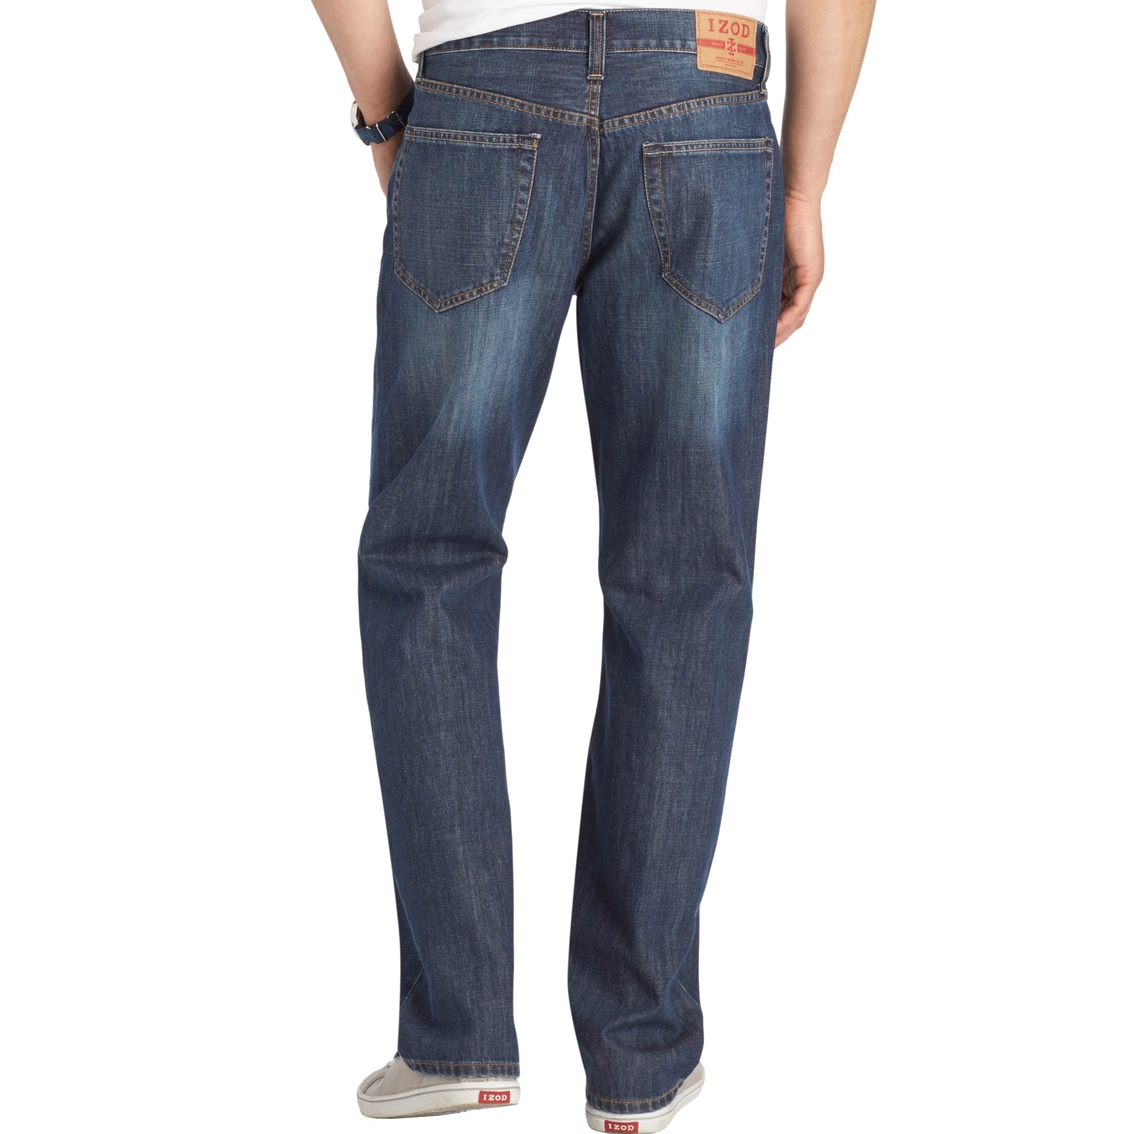 Izod Relaxed Fit Denim Jeans | Saturday - Wk 77 | Shop The Exchange